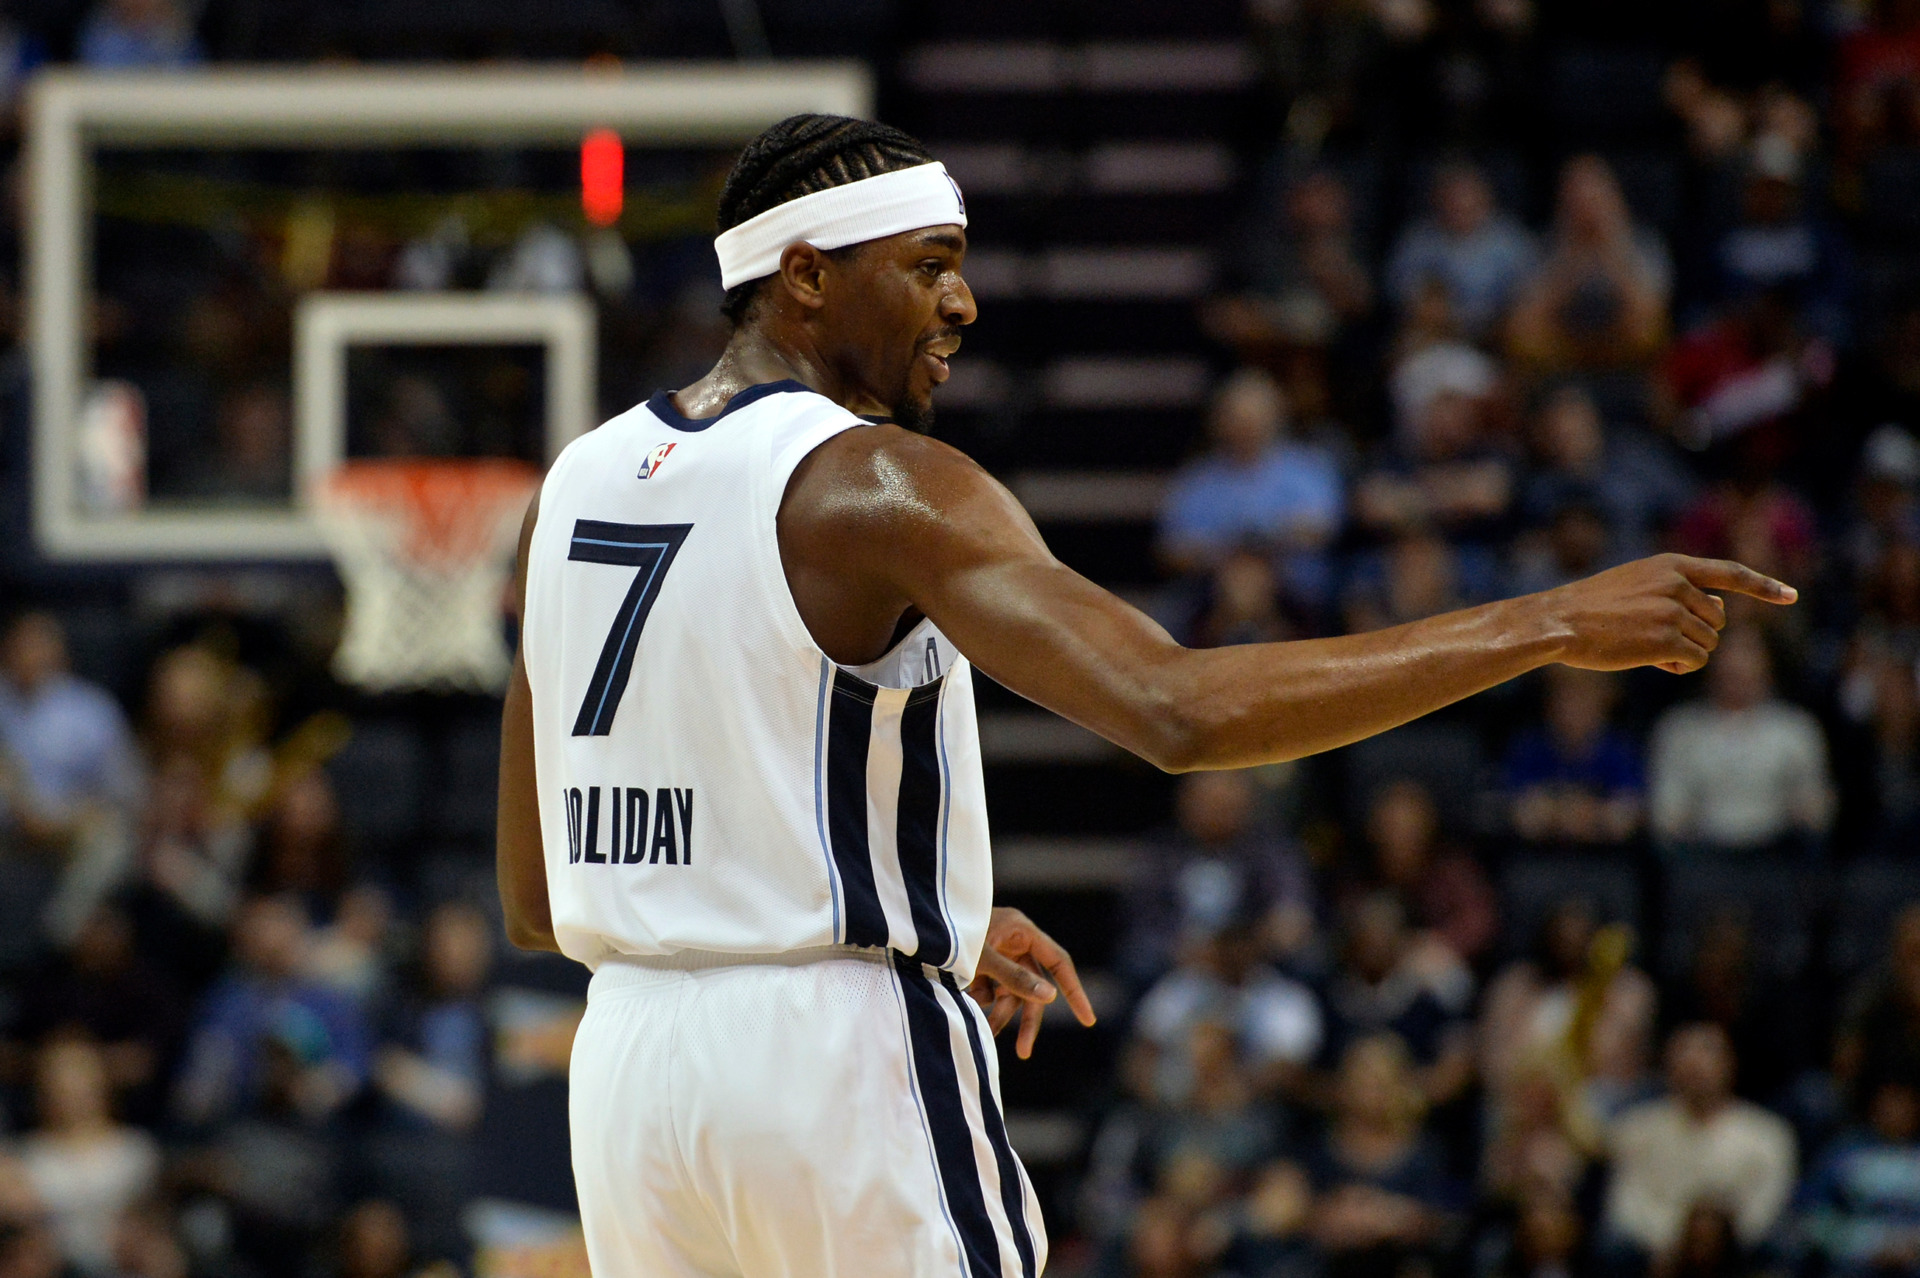 <span><strong>Memphis Grizzlies forward Justin Holiday (7) reacts in the second half of an NBA basketball game against the Minnesota Timberwolves Tuesday, Feb. 5, 2019, in Memphis, Tenn.</strong> (AP Photo/Brandon Dill)</span>